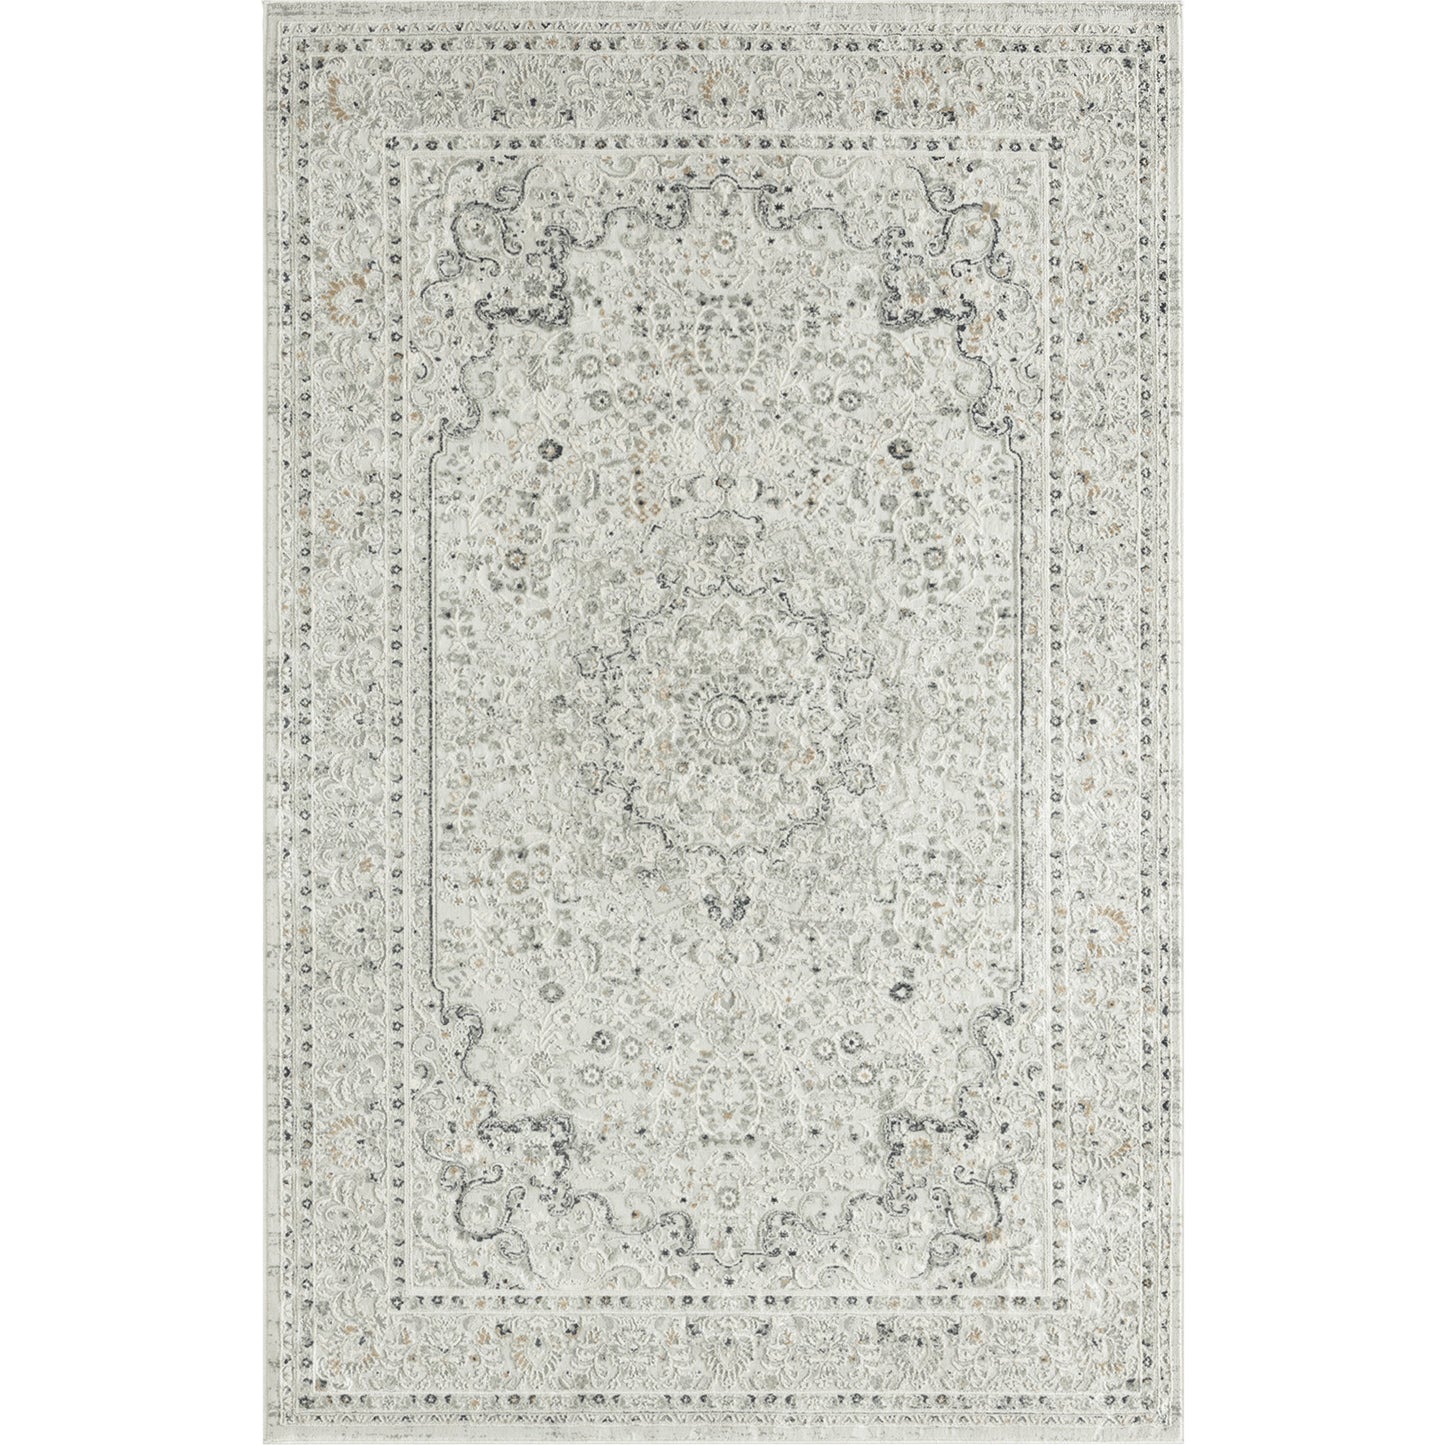 9' X 12' Ivory Gray And Taupe Floral Power Loom Stain Resistant Area Rug